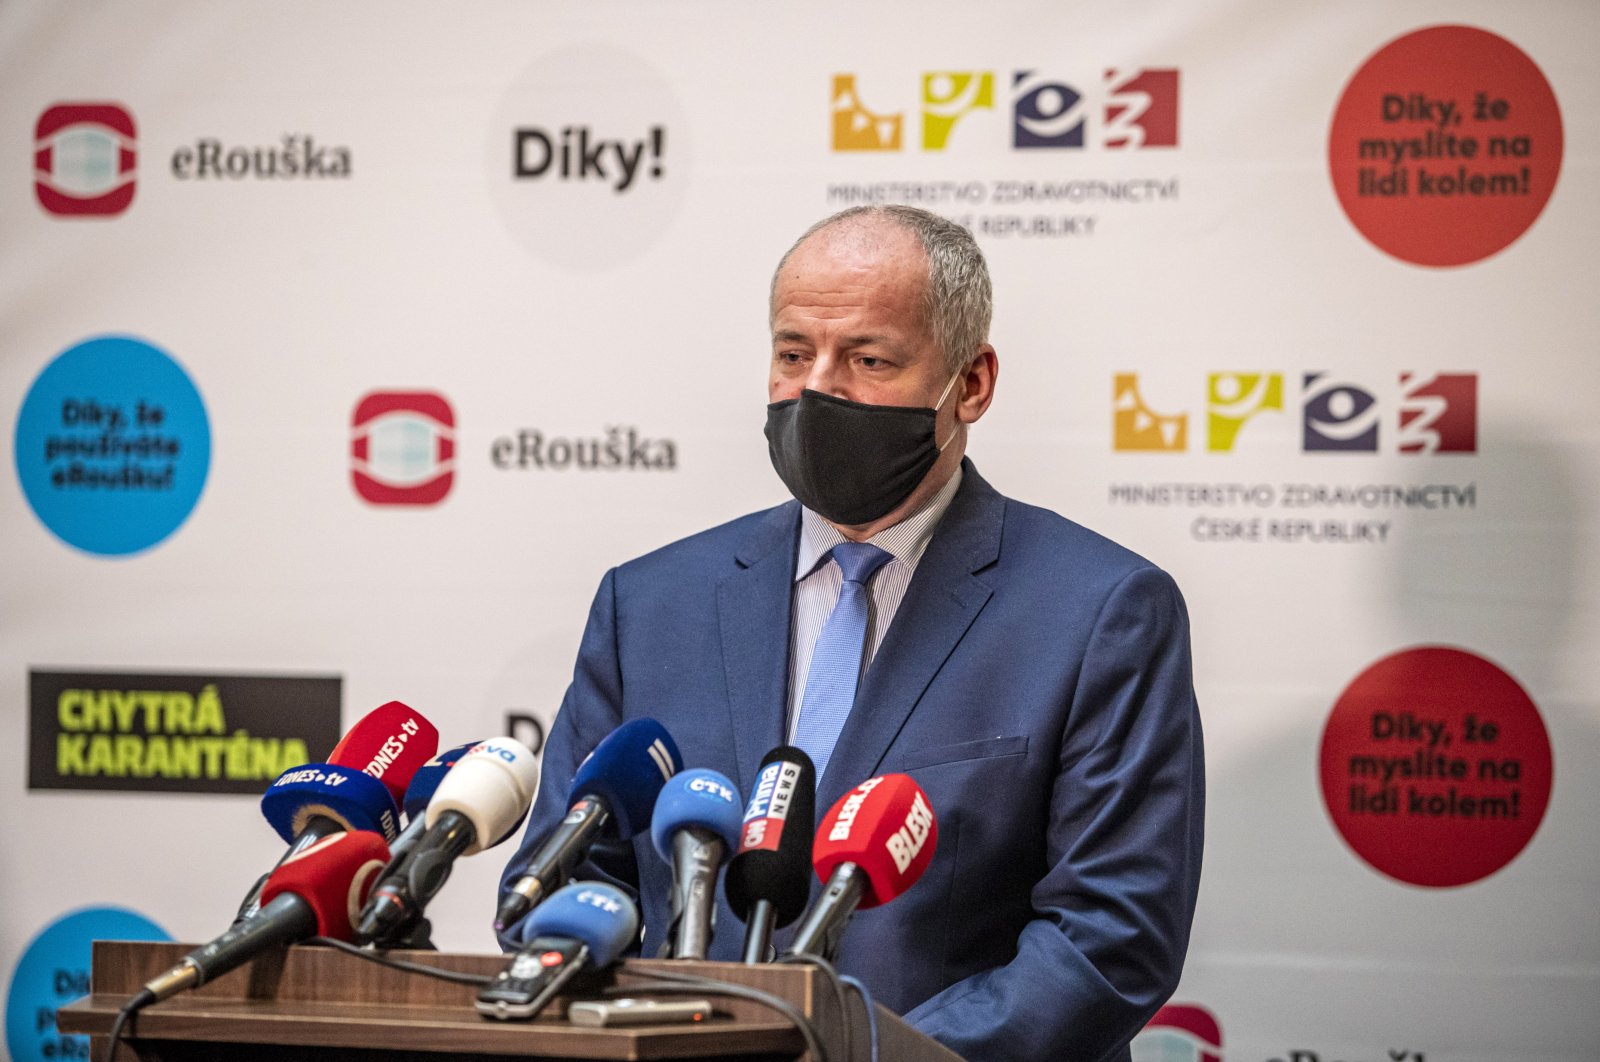 Czech Health Minister Roman Prymula speaks to media during a press conference in Prague, Czech Republic, Oct. 23, 2020. (EPA Photo)